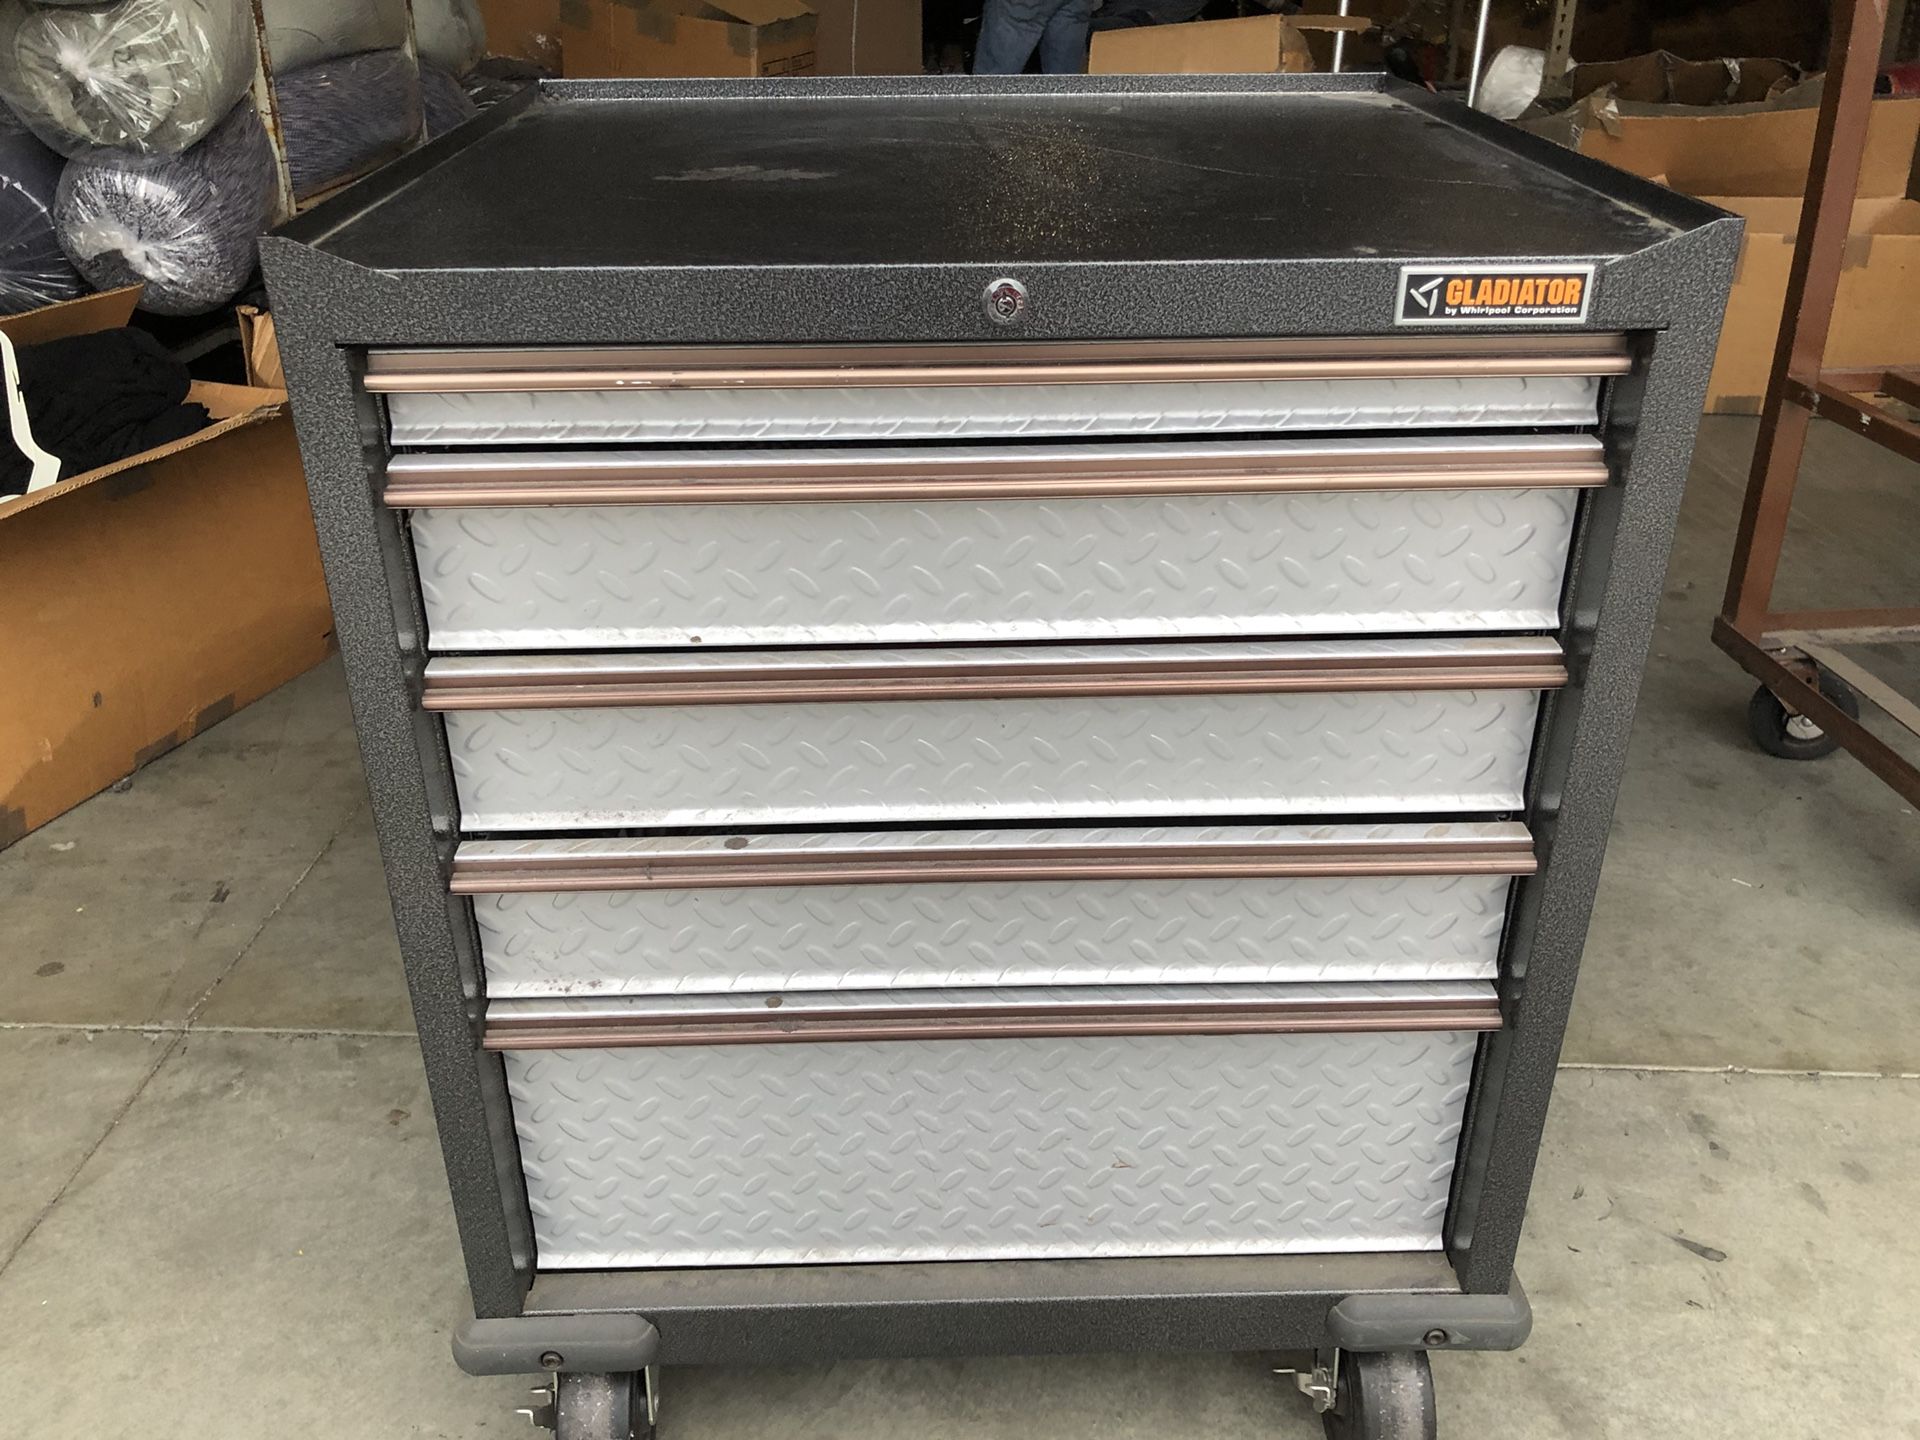 Gladiator Metal Tool Chest by Whirlpool